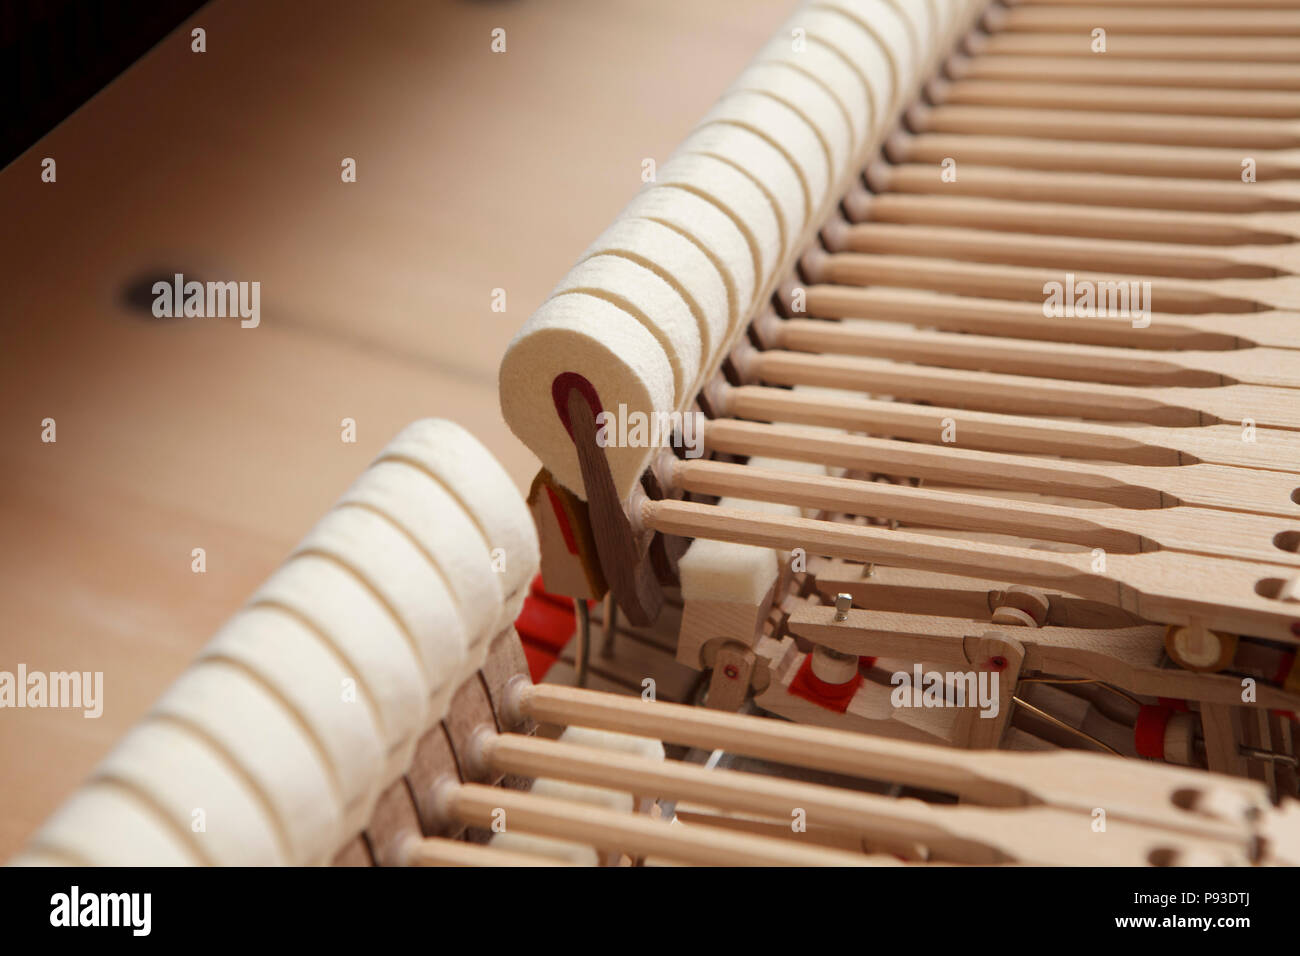 hammers inside the piano, close up Stock Photo